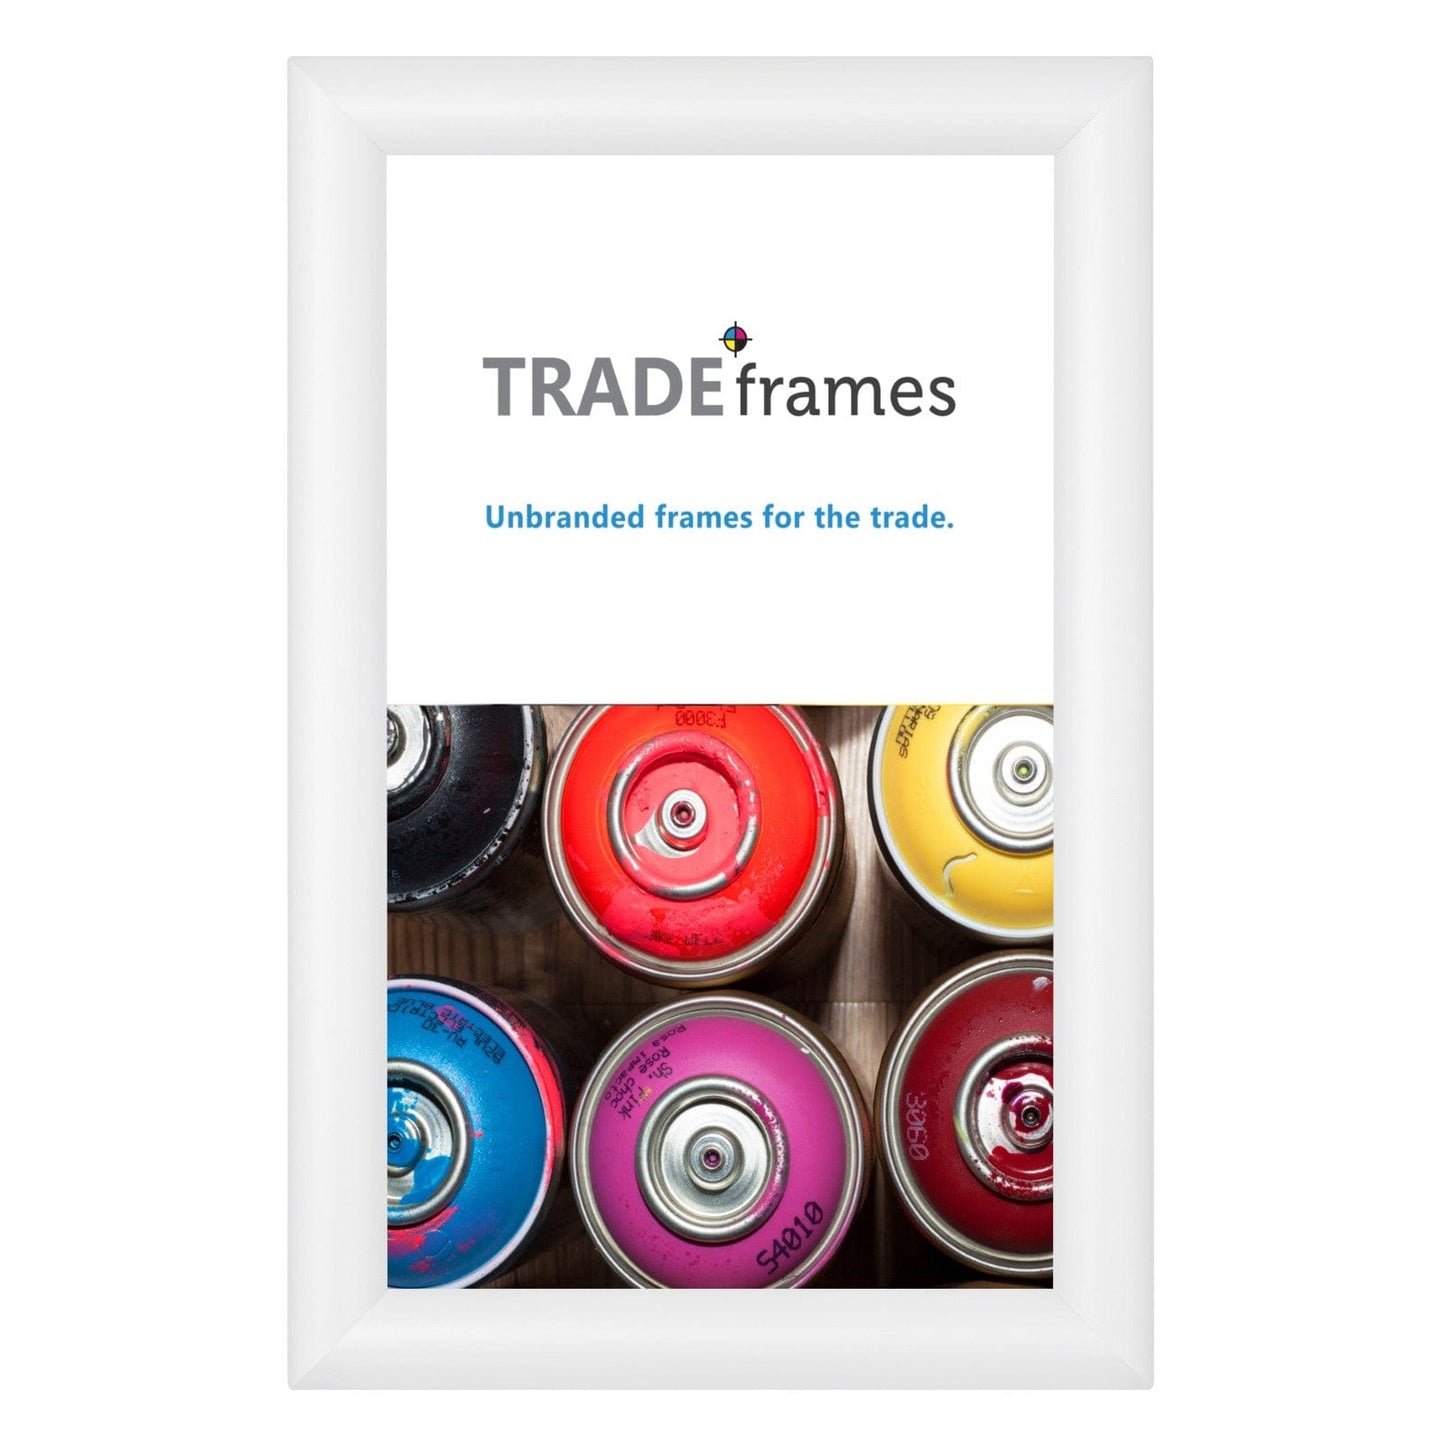 8.5x11 TRADEframe White Snap Frame 8.5x14 - 1.2 inch profile - Snap Frames Direct